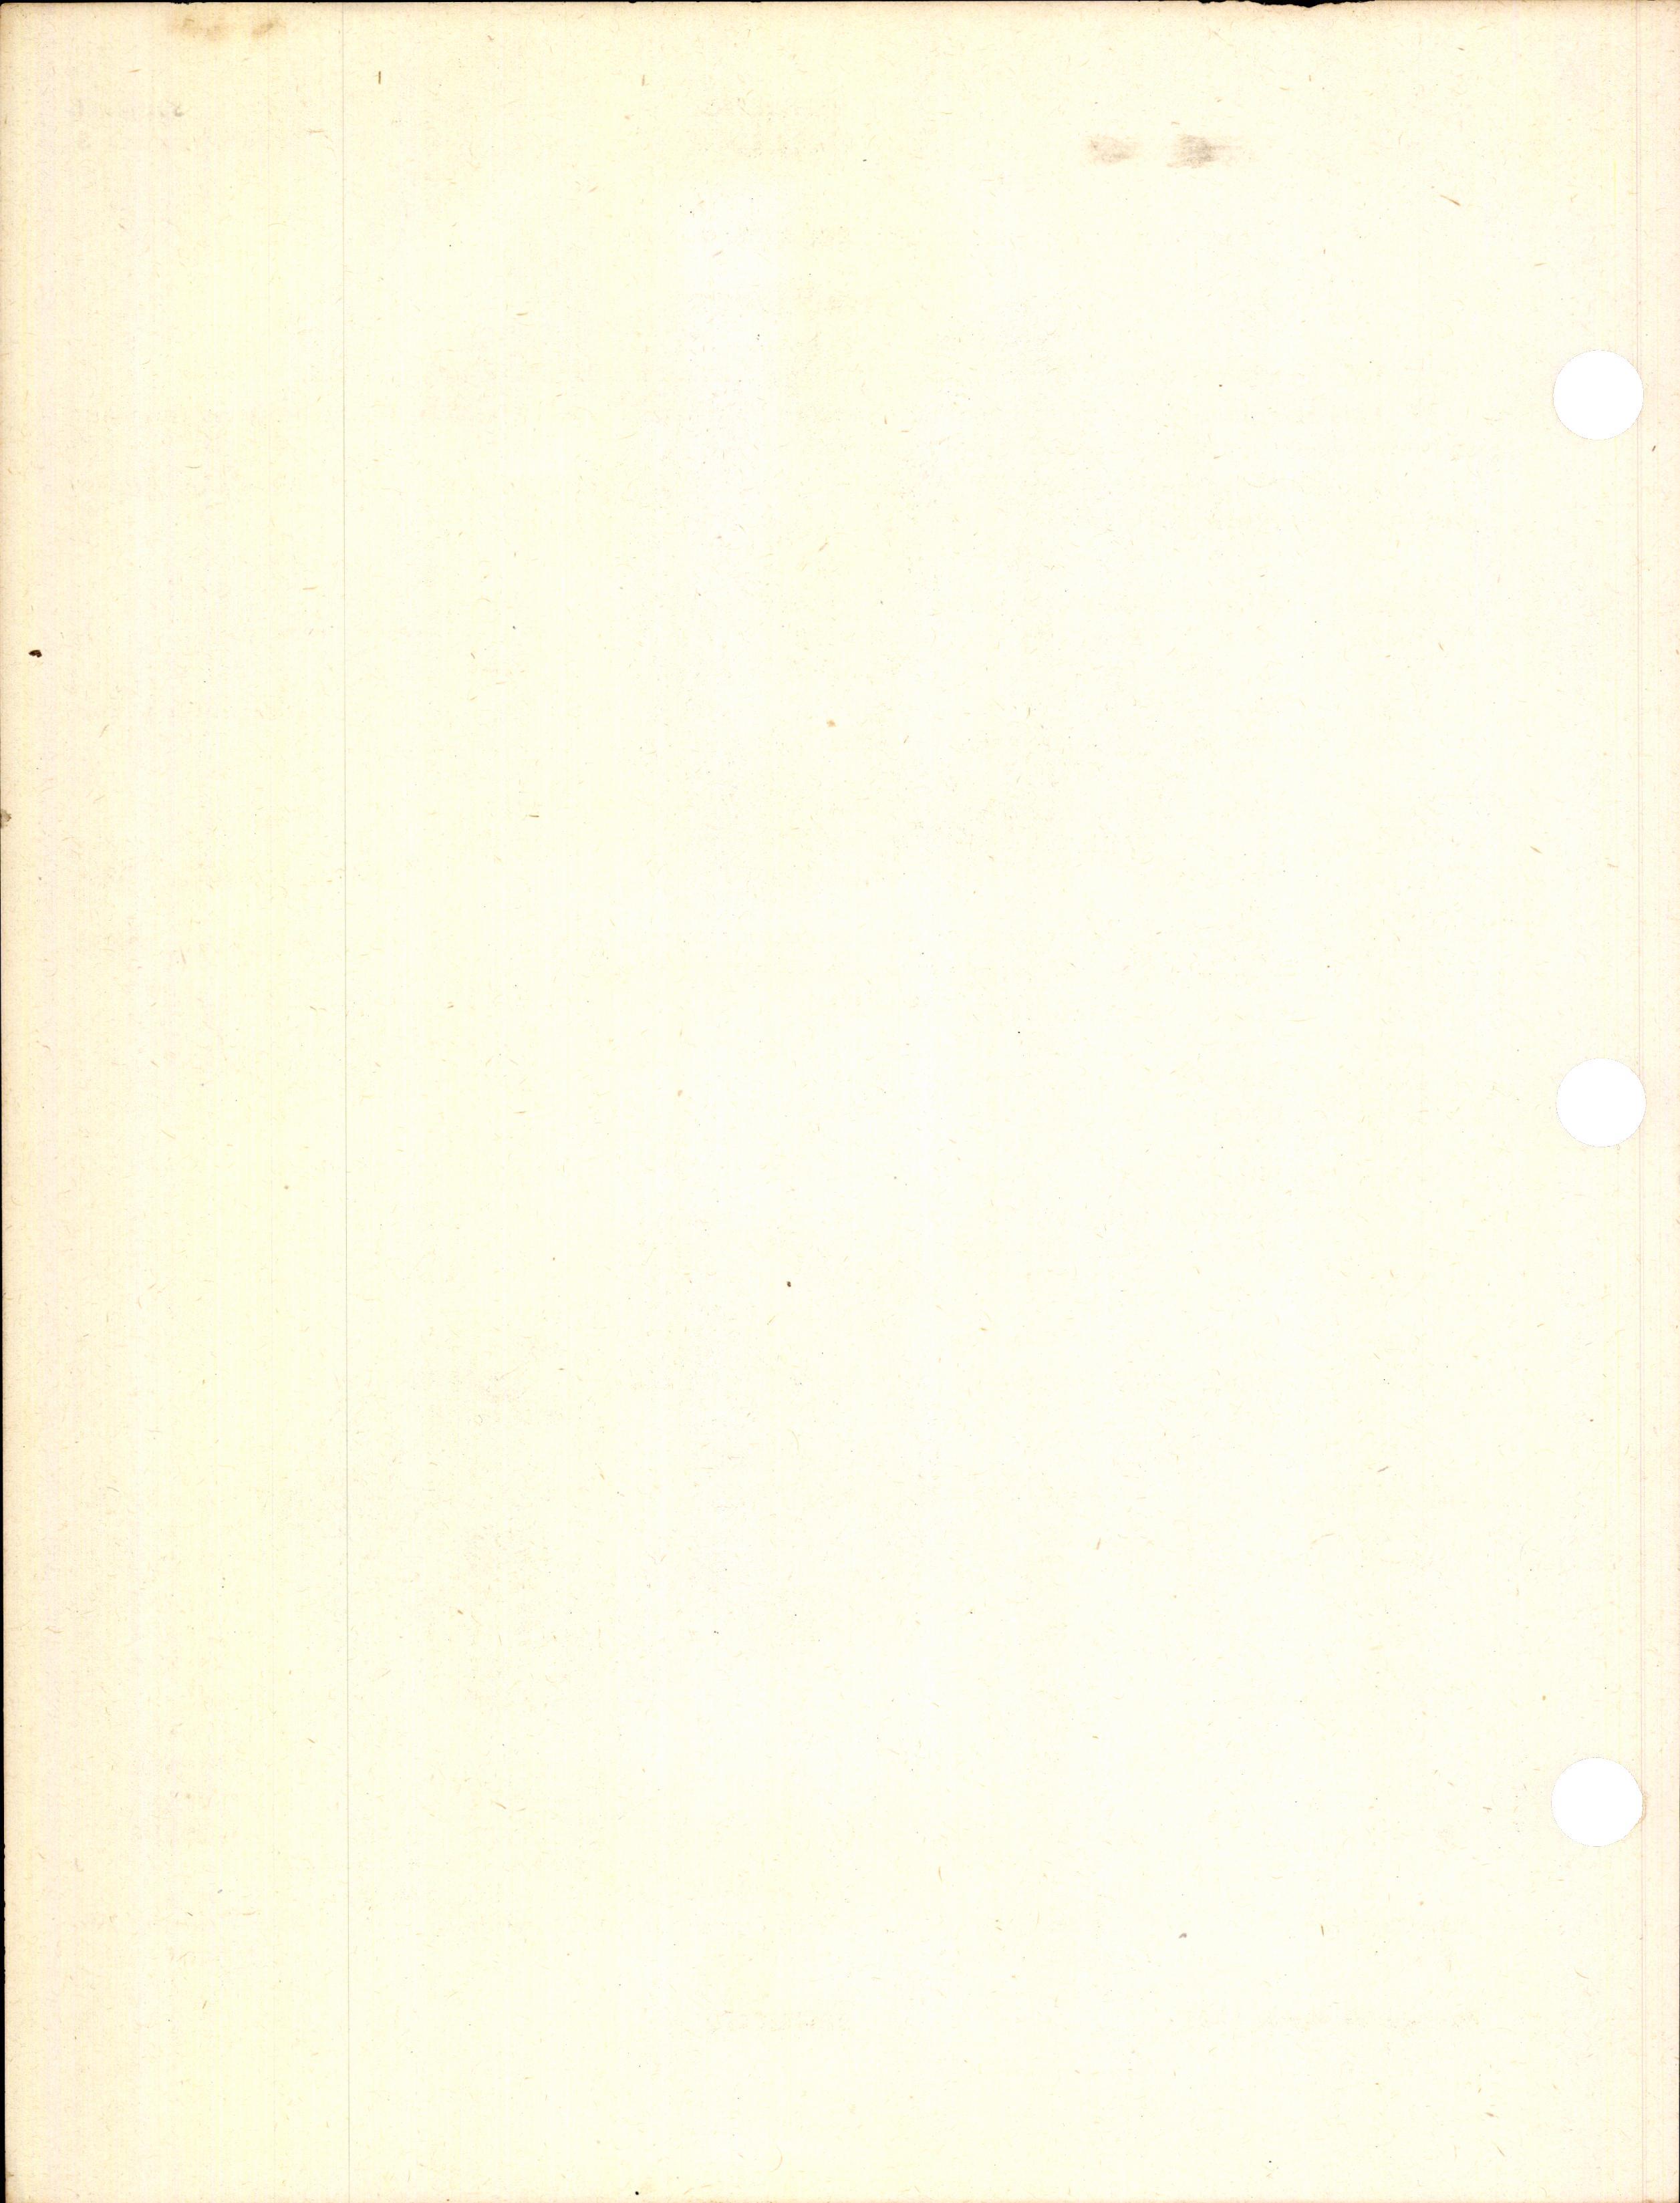 Sample page 8 from AirCorps Library document: Handbook of Instructions with Parts Catalog for Bendix Wheels